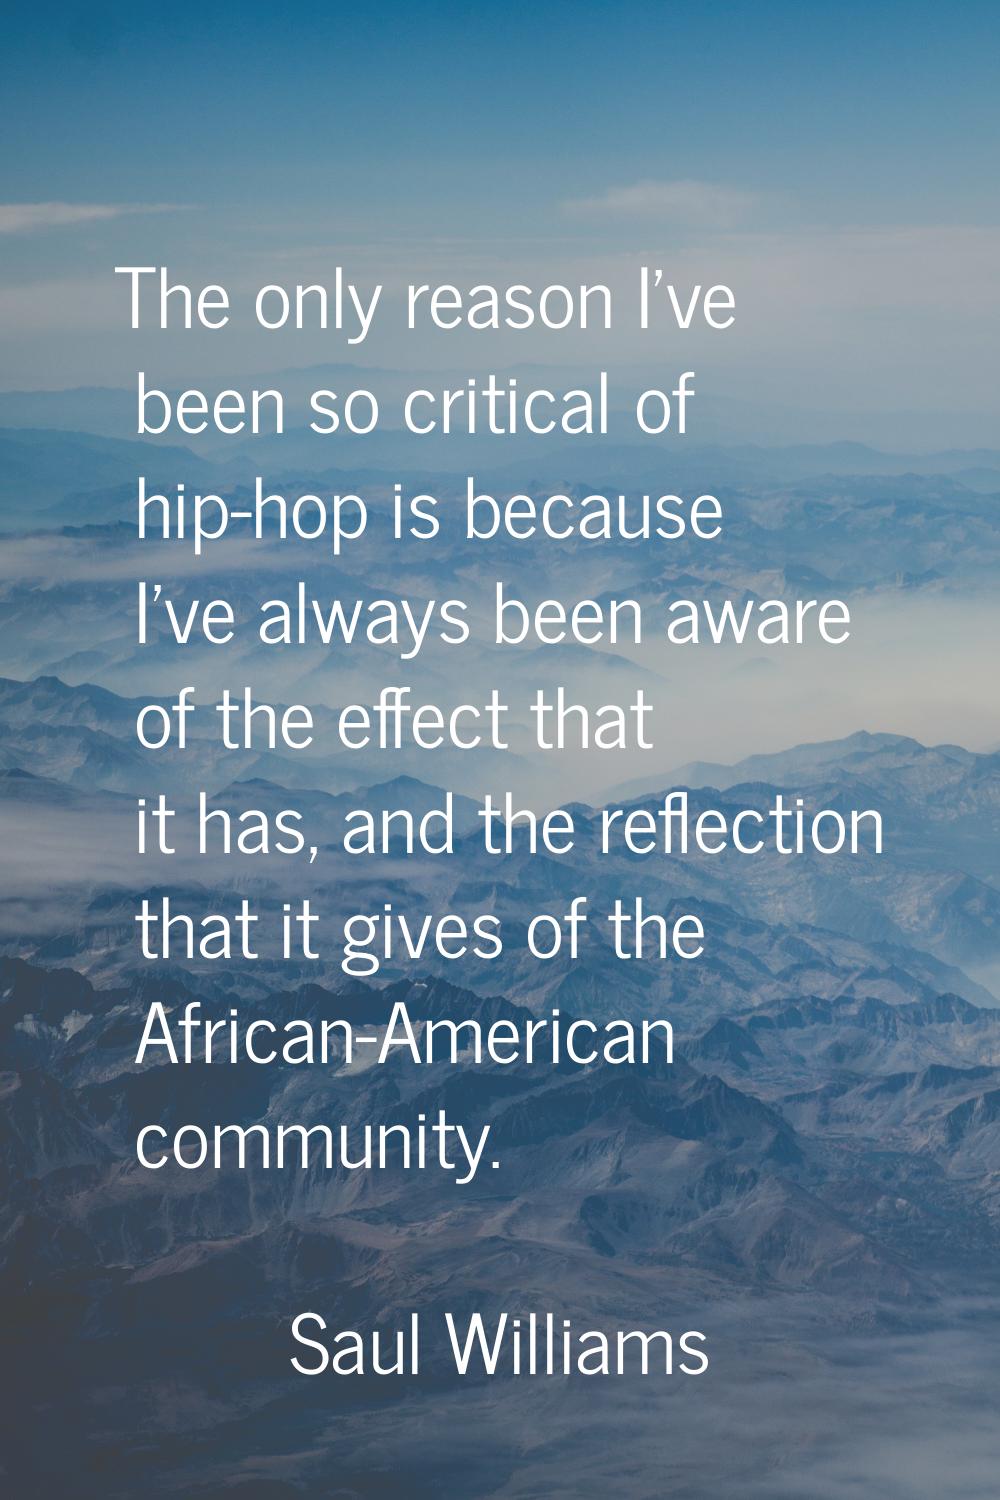 The only reason I've been so critical of hip-hop is because I've always been aware of the effect th